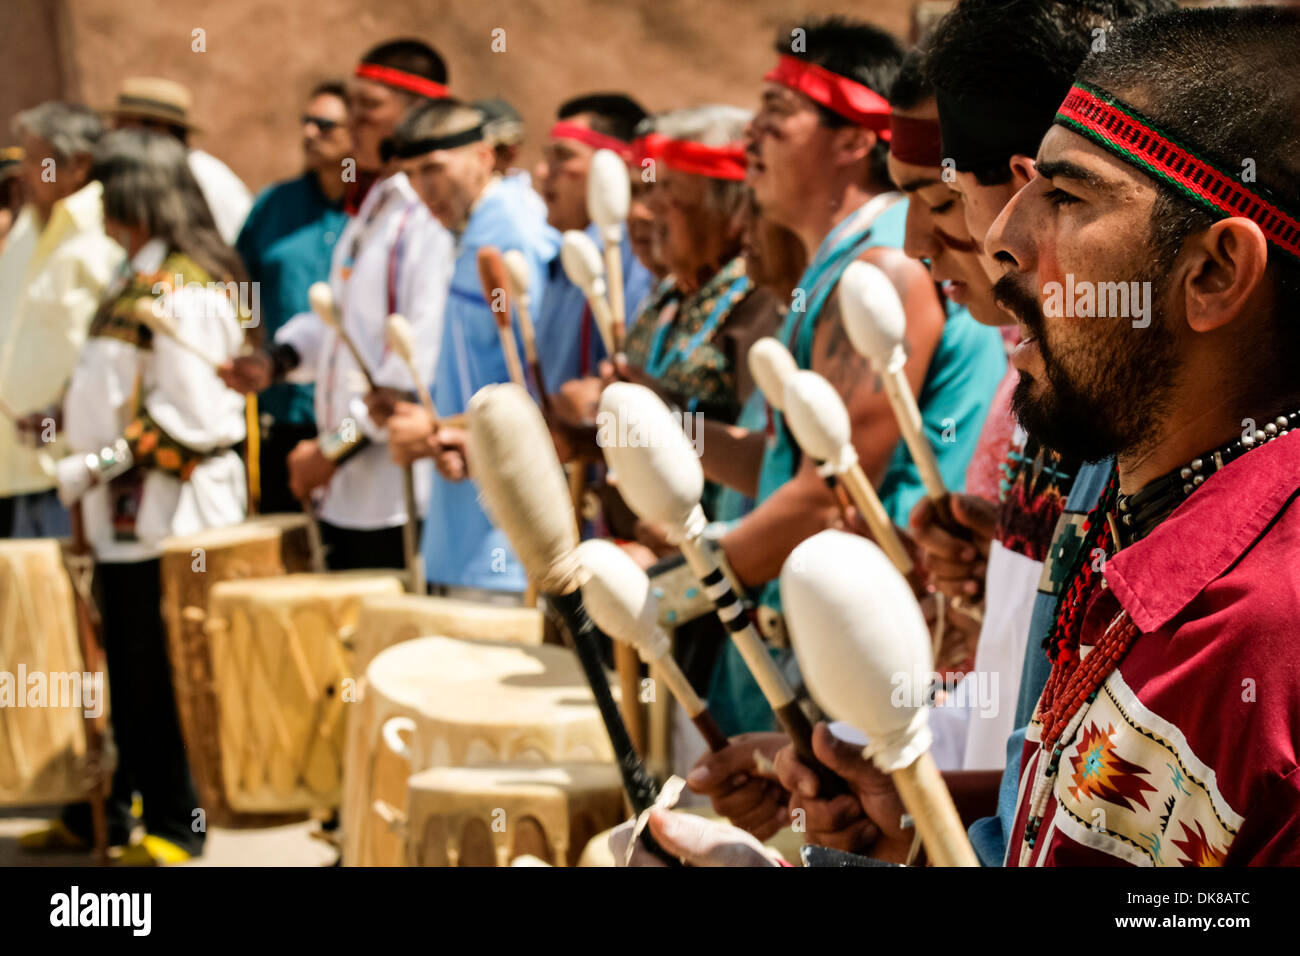 Ohkay Owingeh Pueblo, New Mexico, United States. Summer Feast Day Celebration. Tewa tribe. Male drummers play for the dancers. Stock Photo